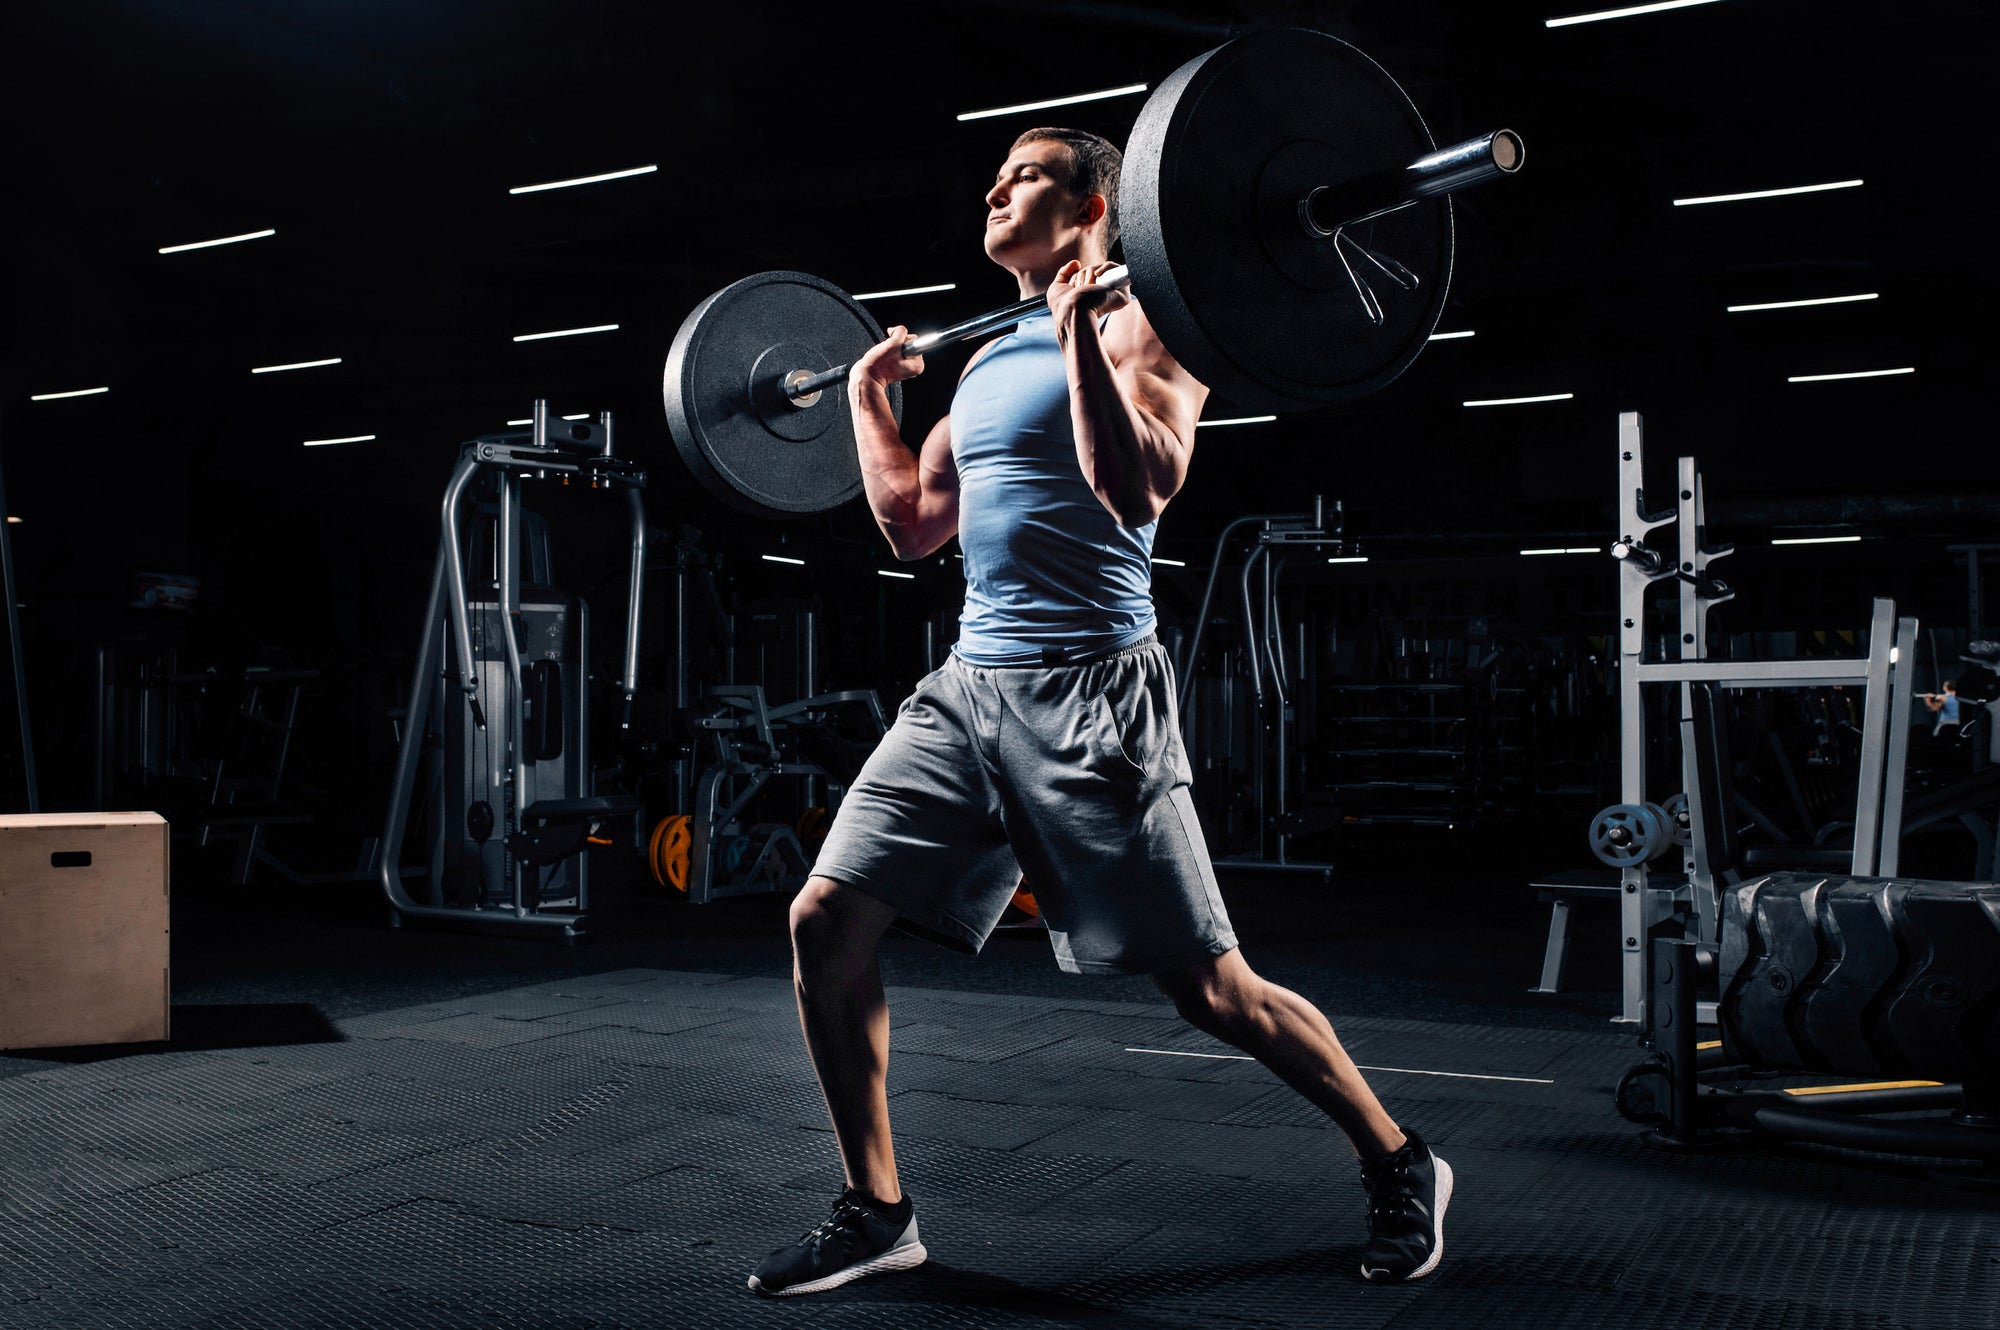 How to Master the High Pull Exercise for Maximum Power